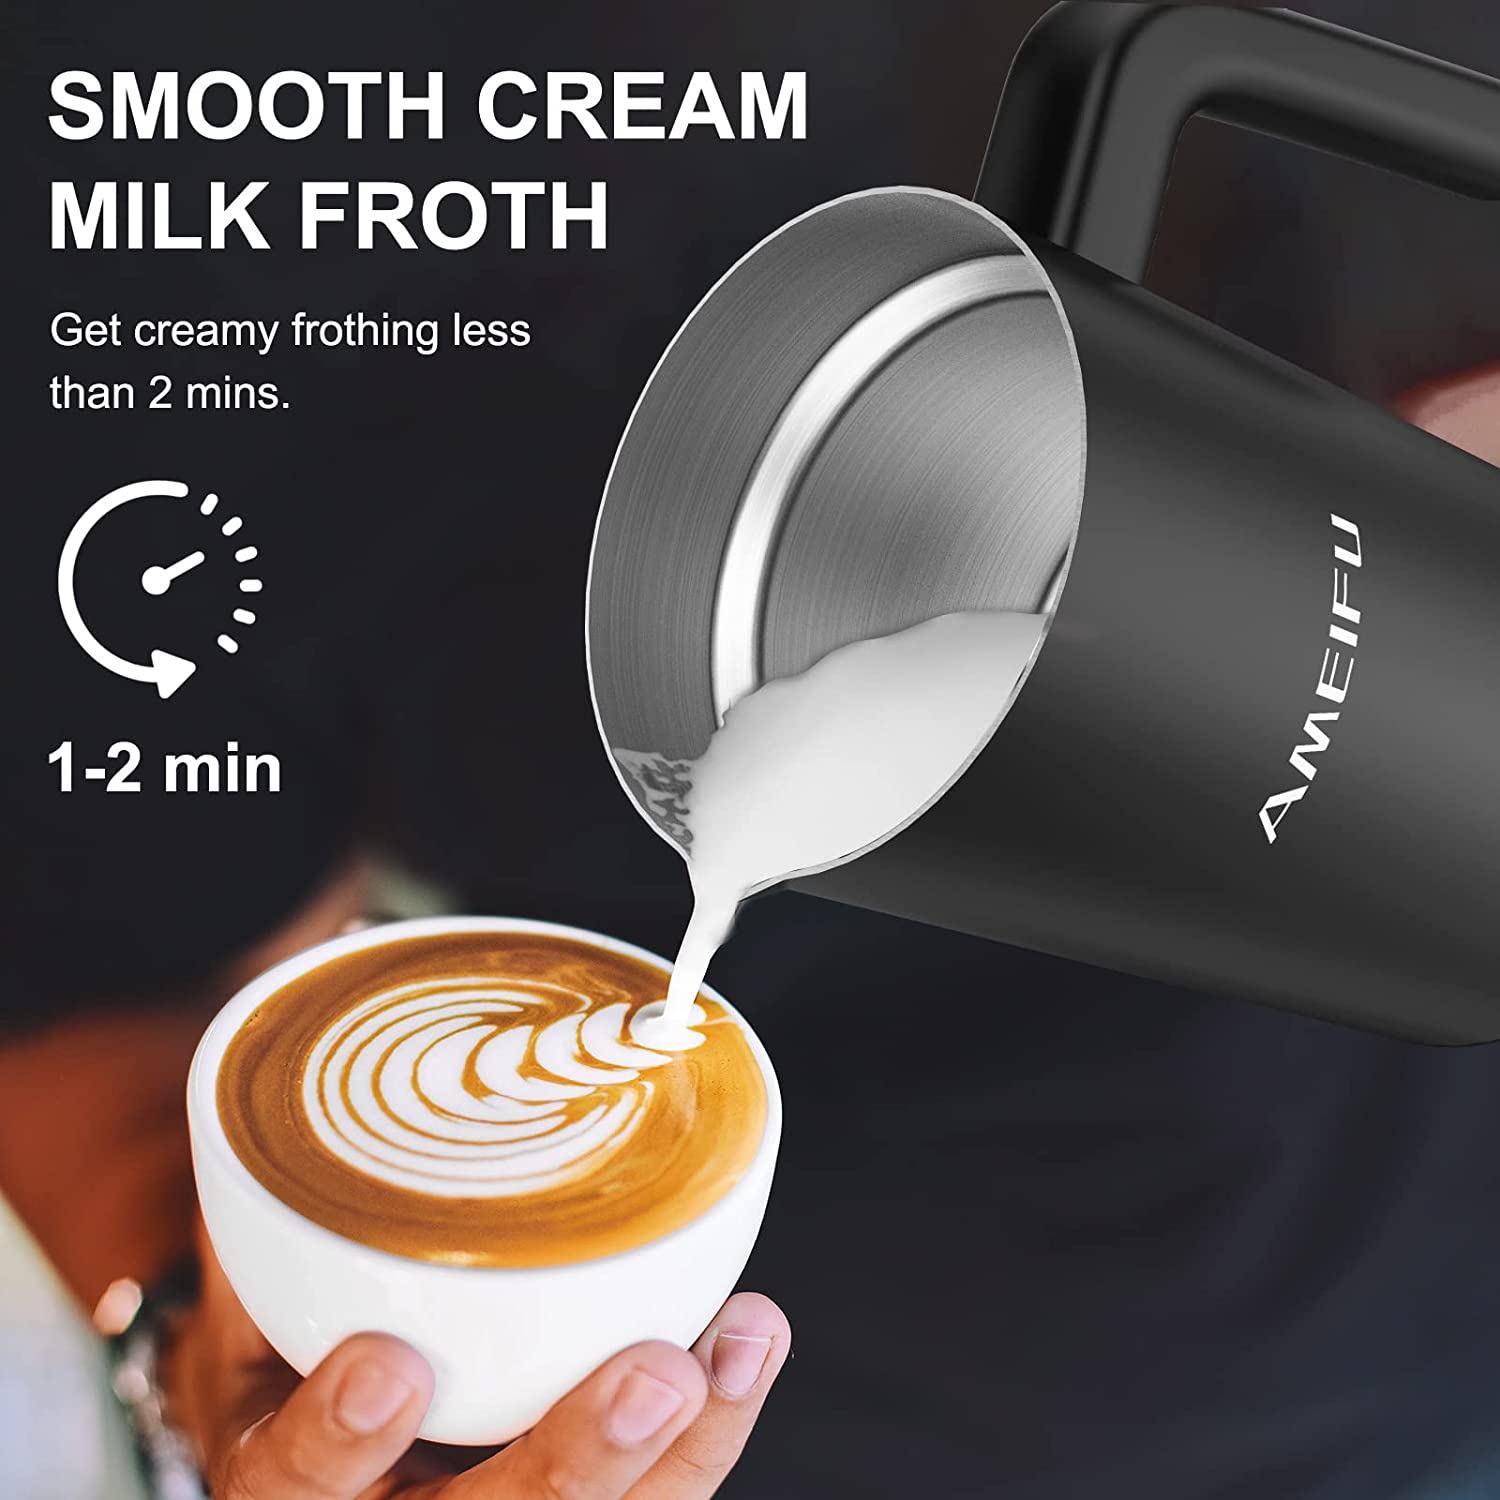 Milk Frother, 4 in 1 Electric Milk Steamer, Automatic Hot and Cold Foam  Maker, Auto Shut-Off Frother for Coffee, Latte, Cappuccino (Black)